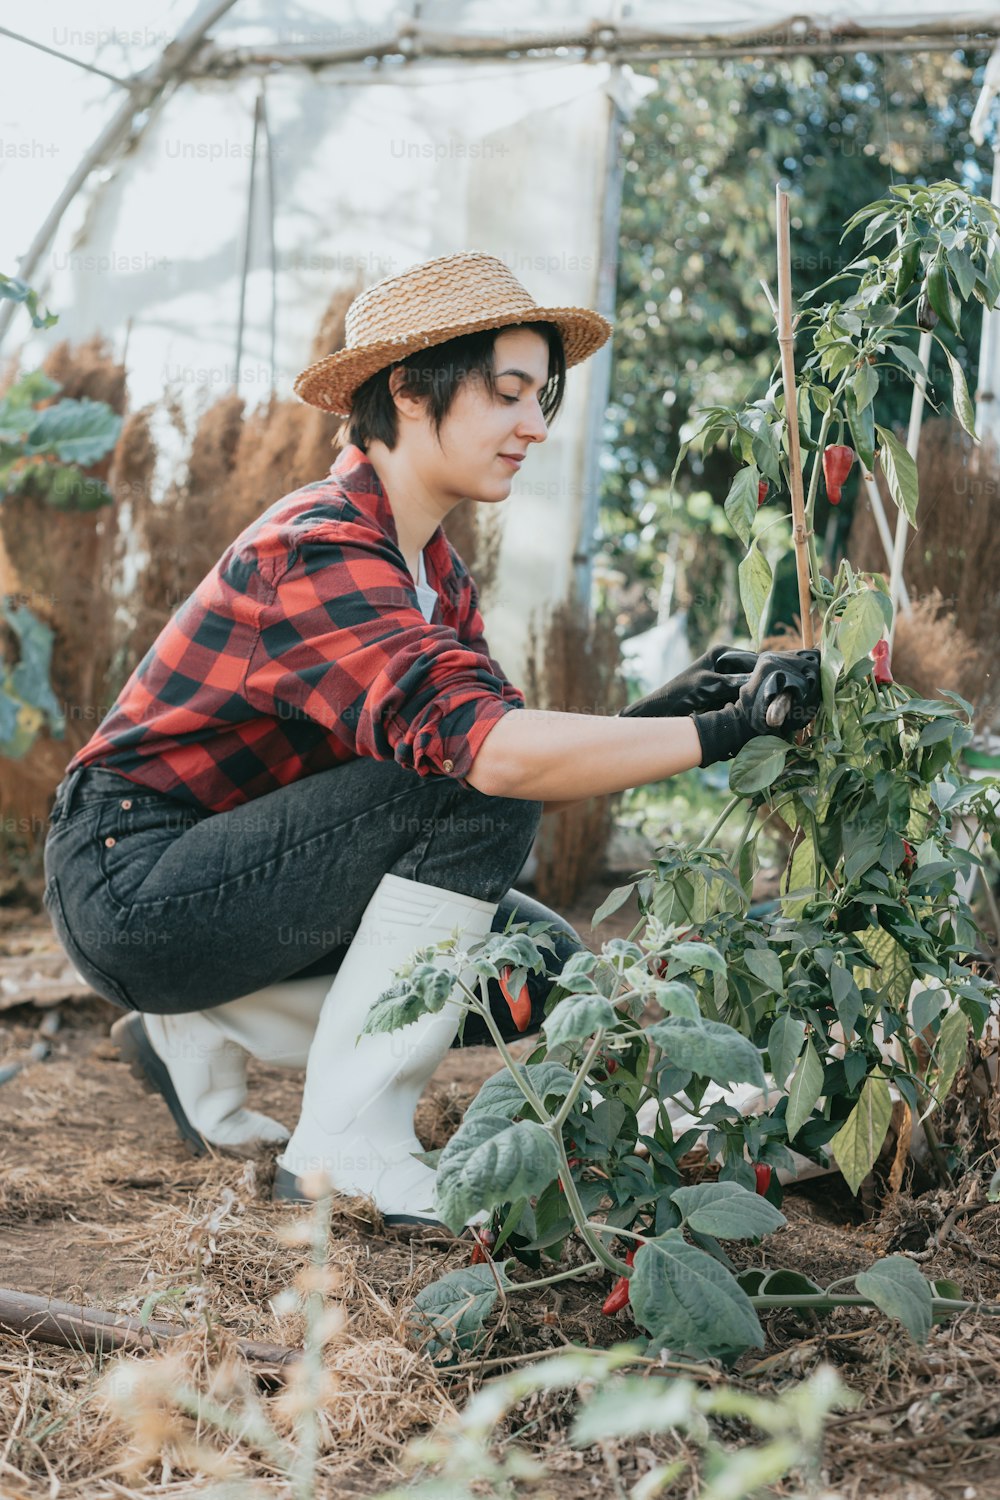 a woman in a straw hat is tending to a plant